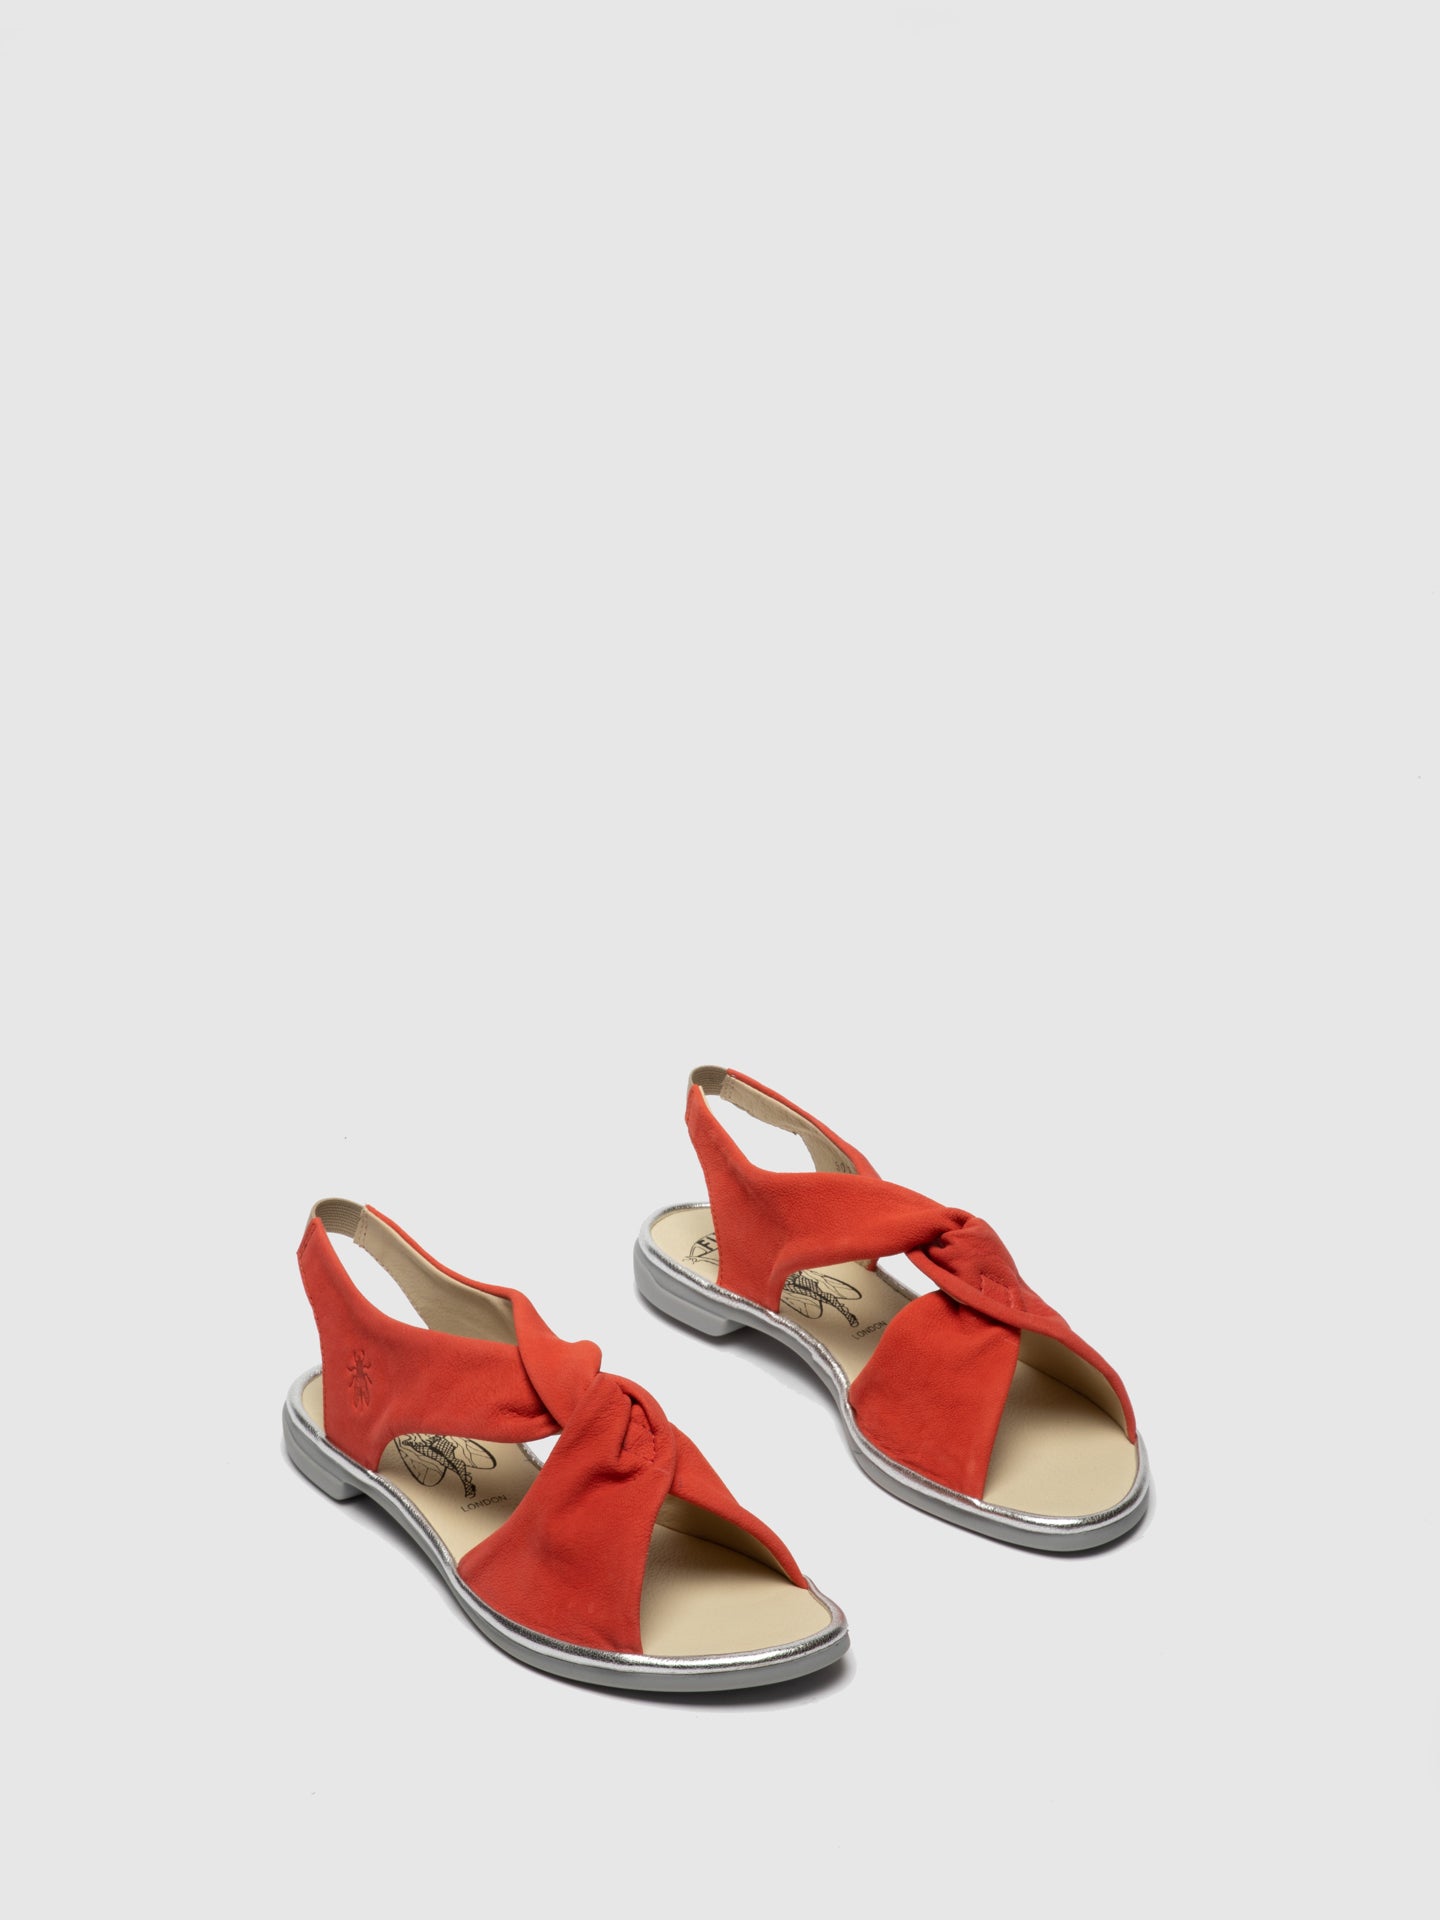 Fly London Crossover Sandals CABI168FLY Orange